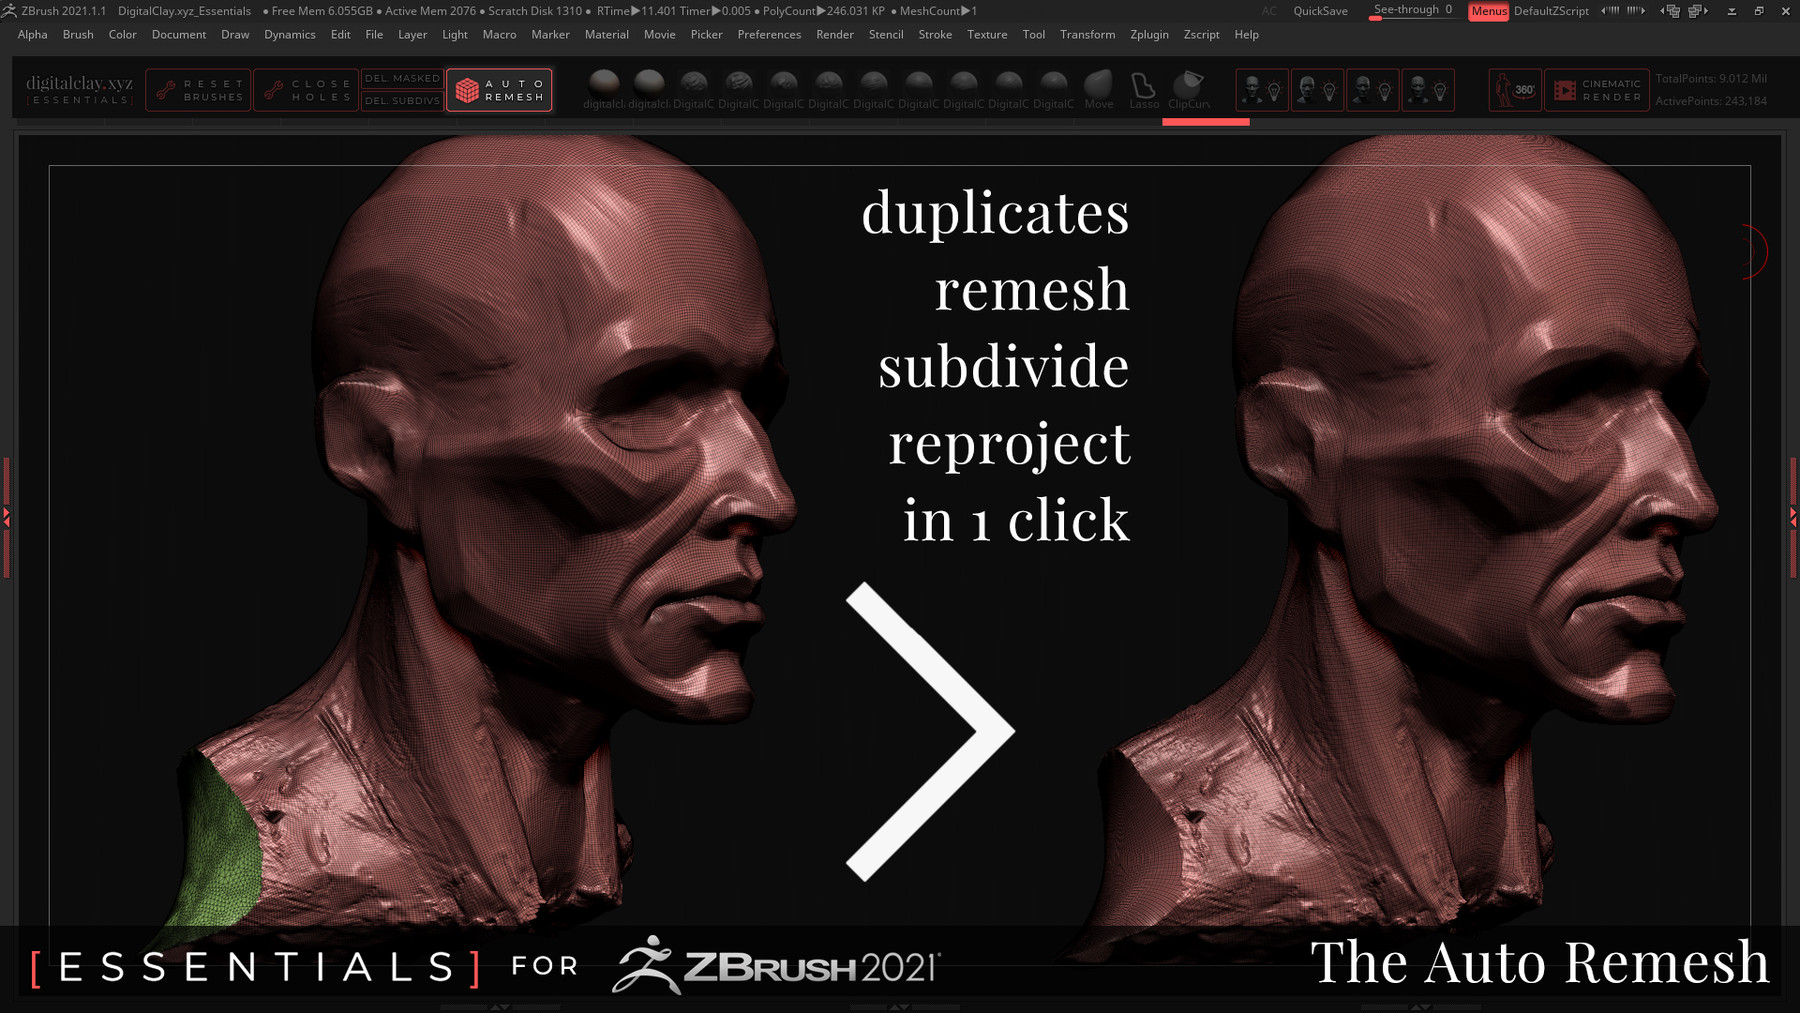 essential books for zbrush artists